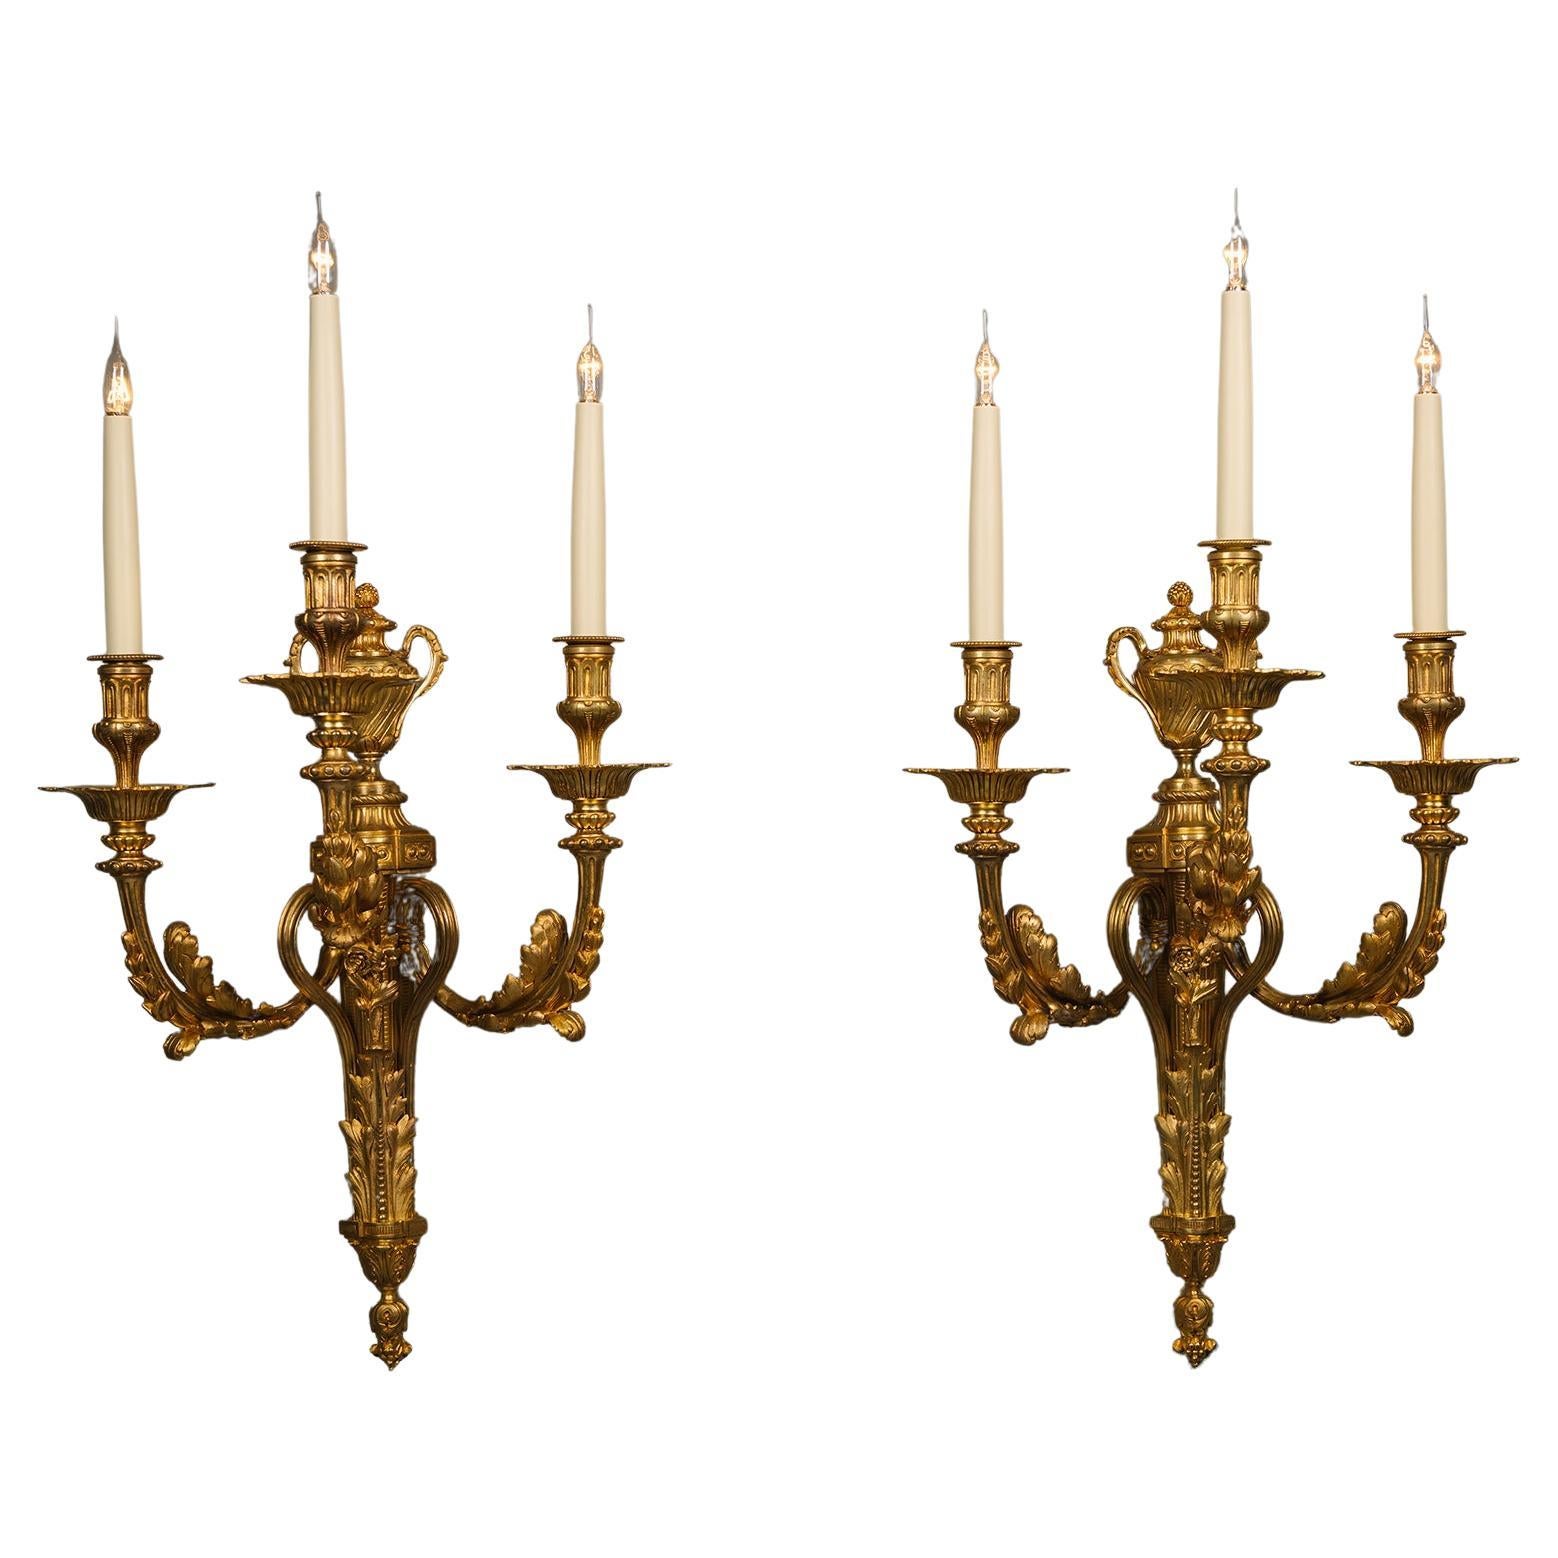 A Pair of Louis XVI Style Gilt-Bronze Three-Light Wall-Appliques For Sale